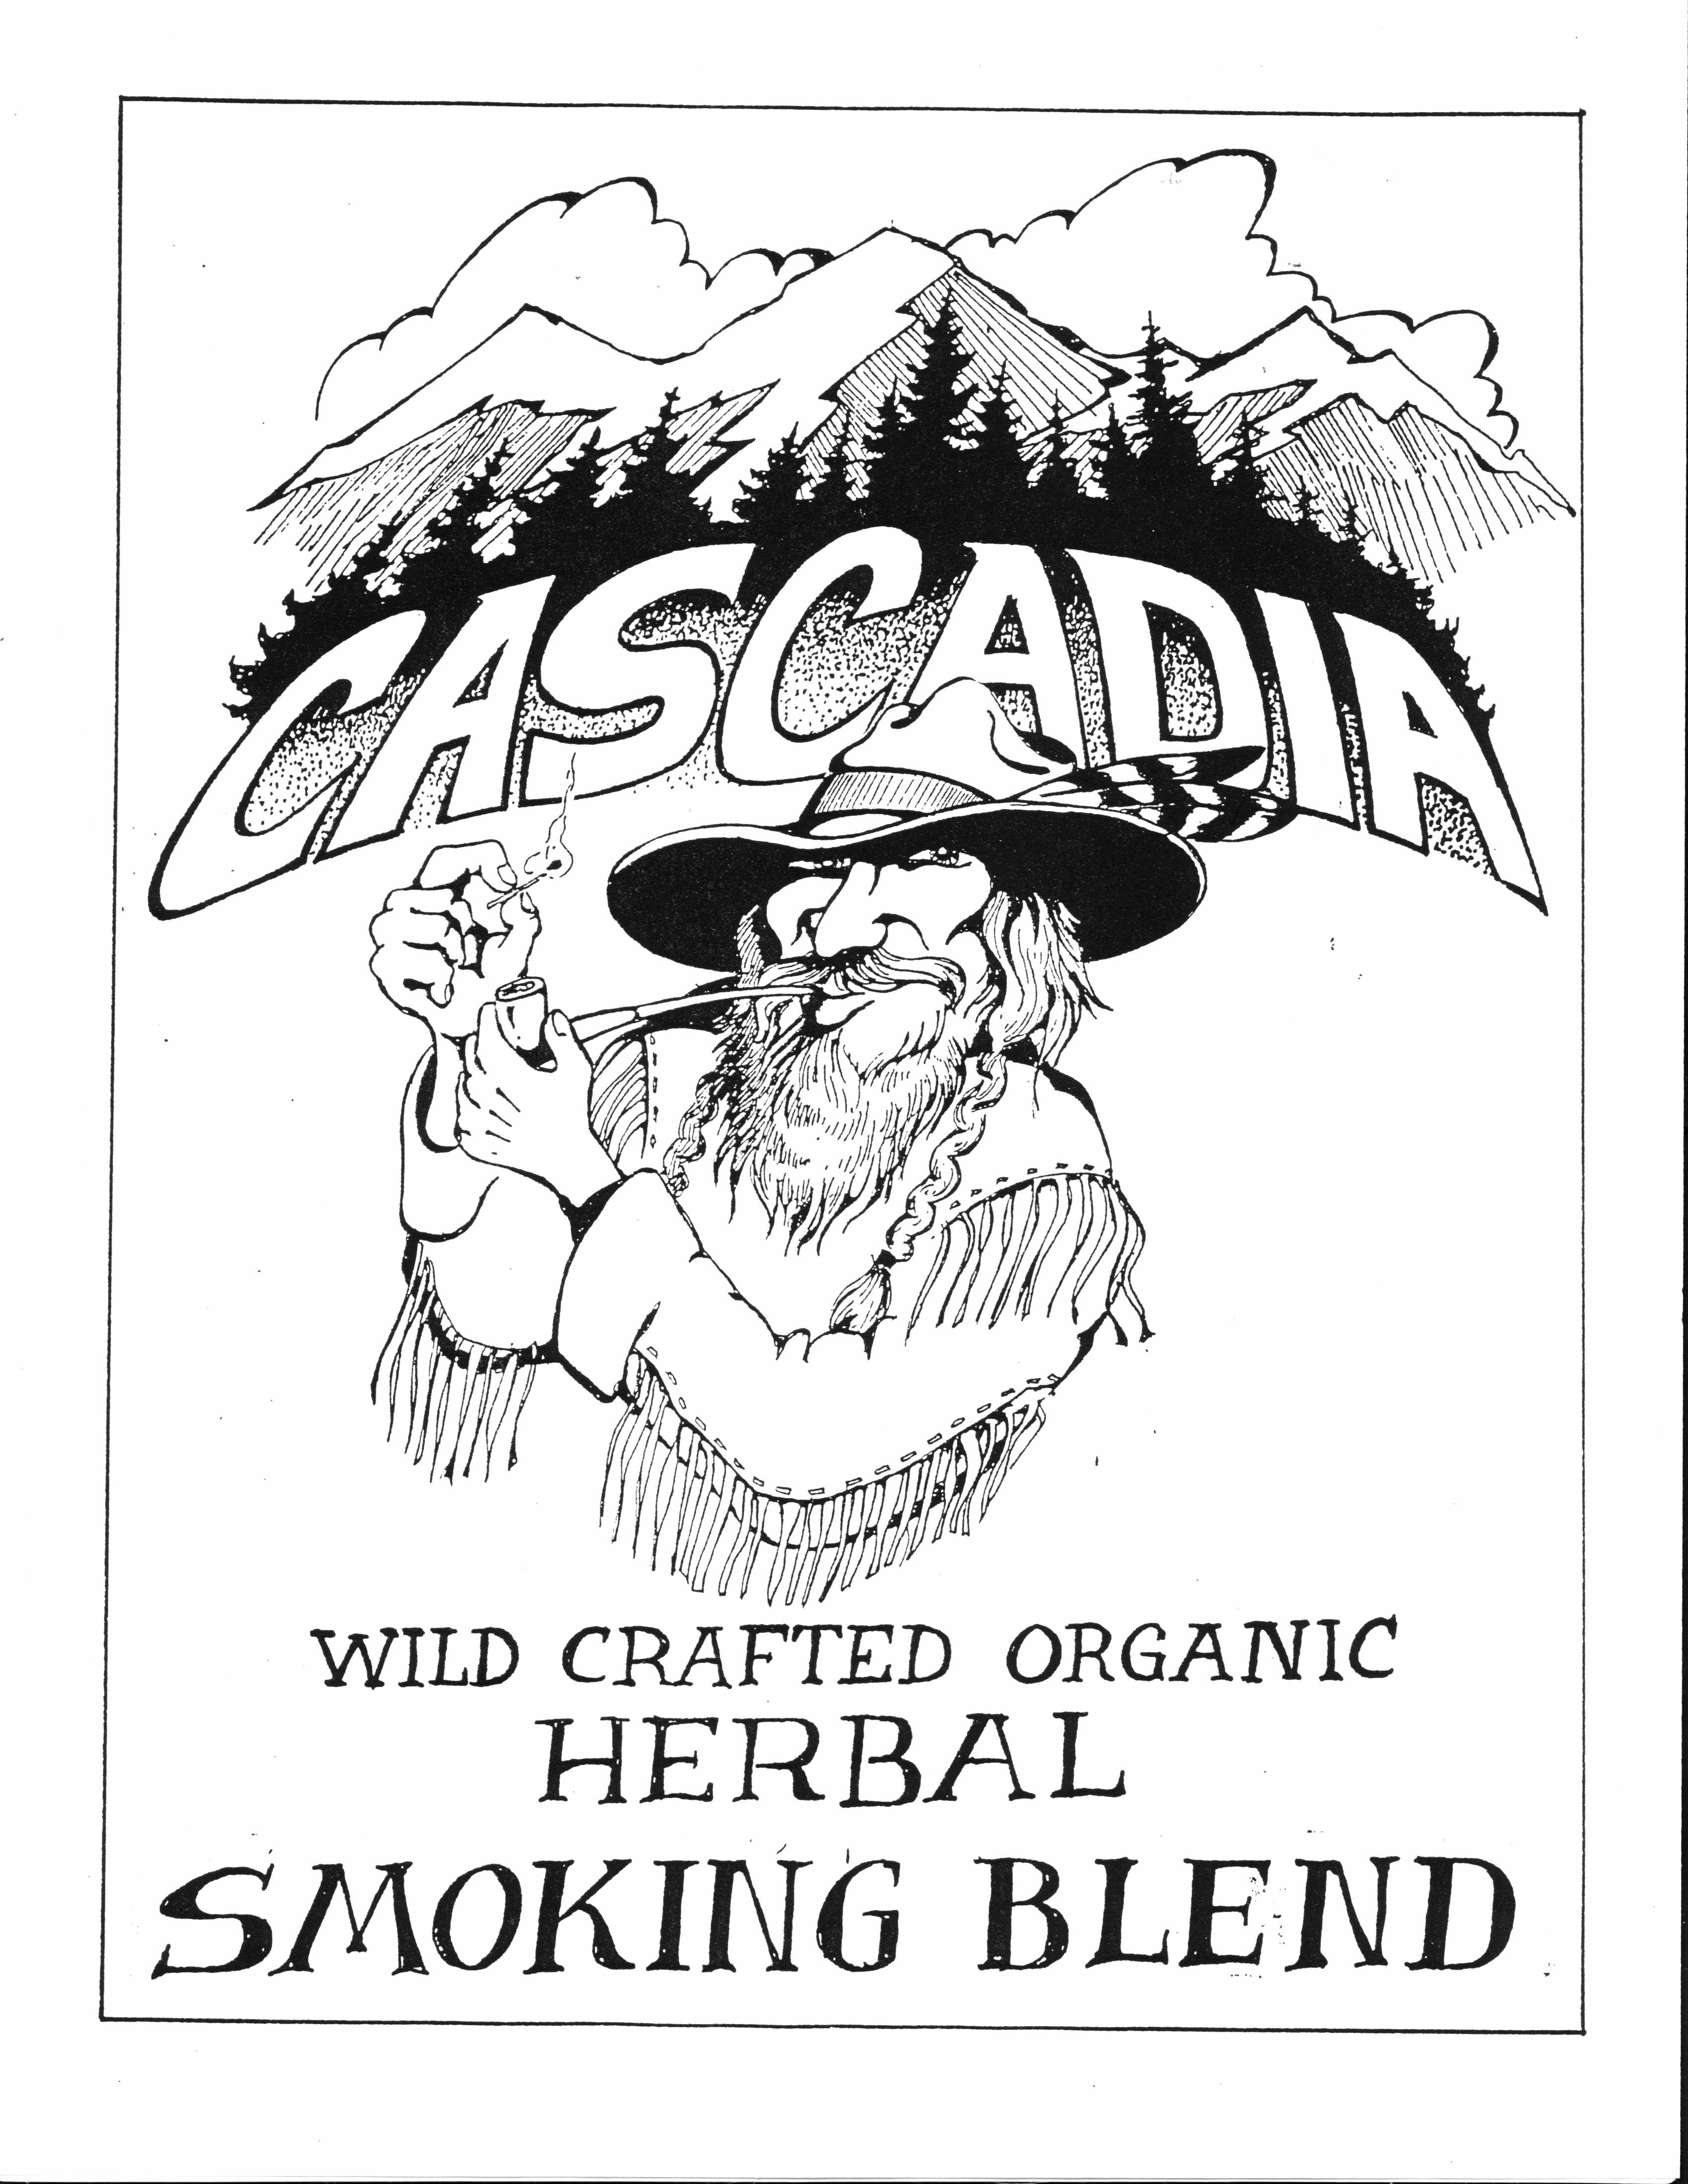 One of my earliest products: an herbal smoking mixture called "Cascadia"